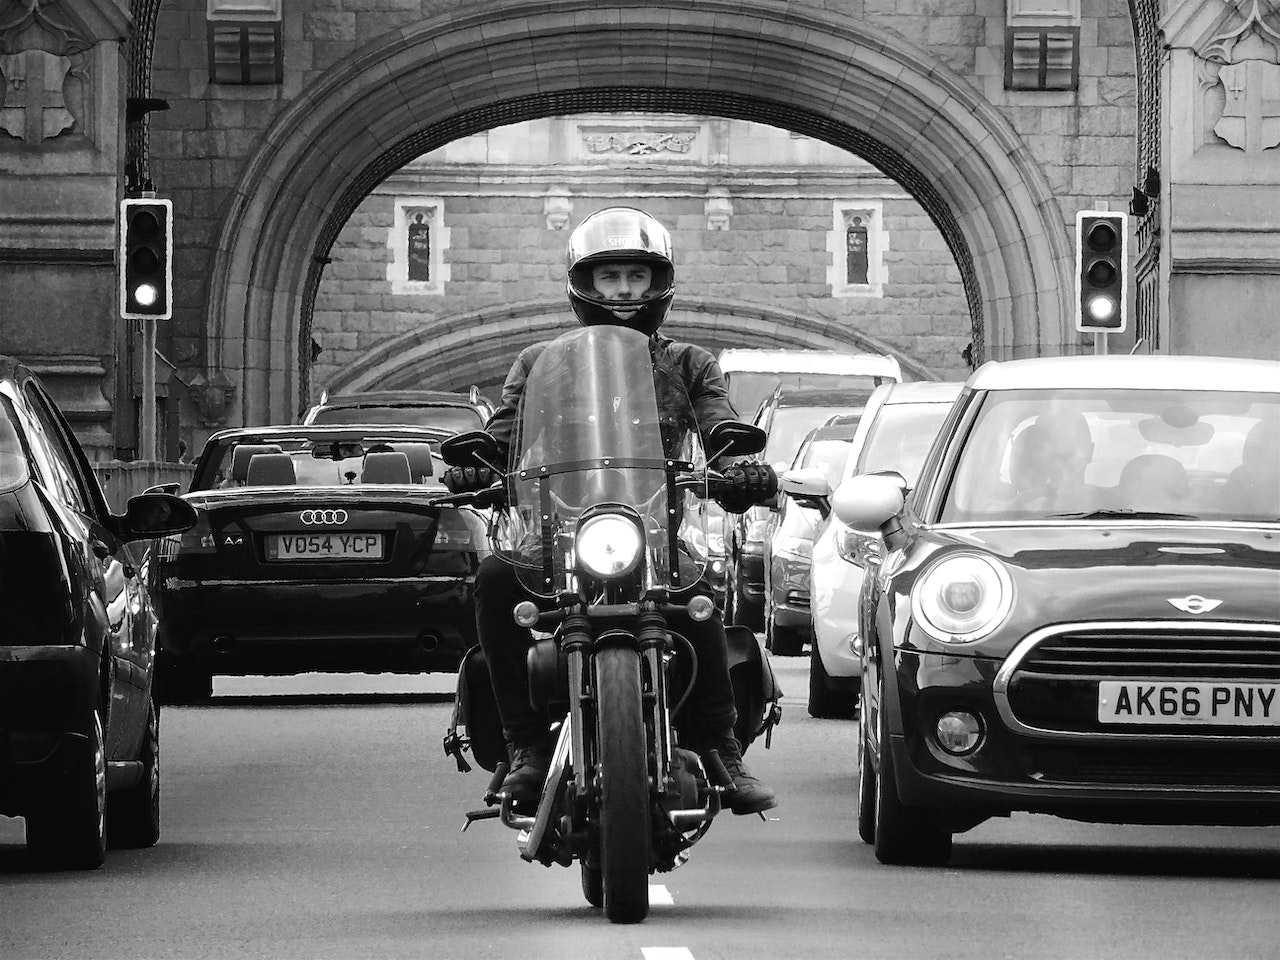 Black and white photo of a man riding a motorbike in between a row of cars